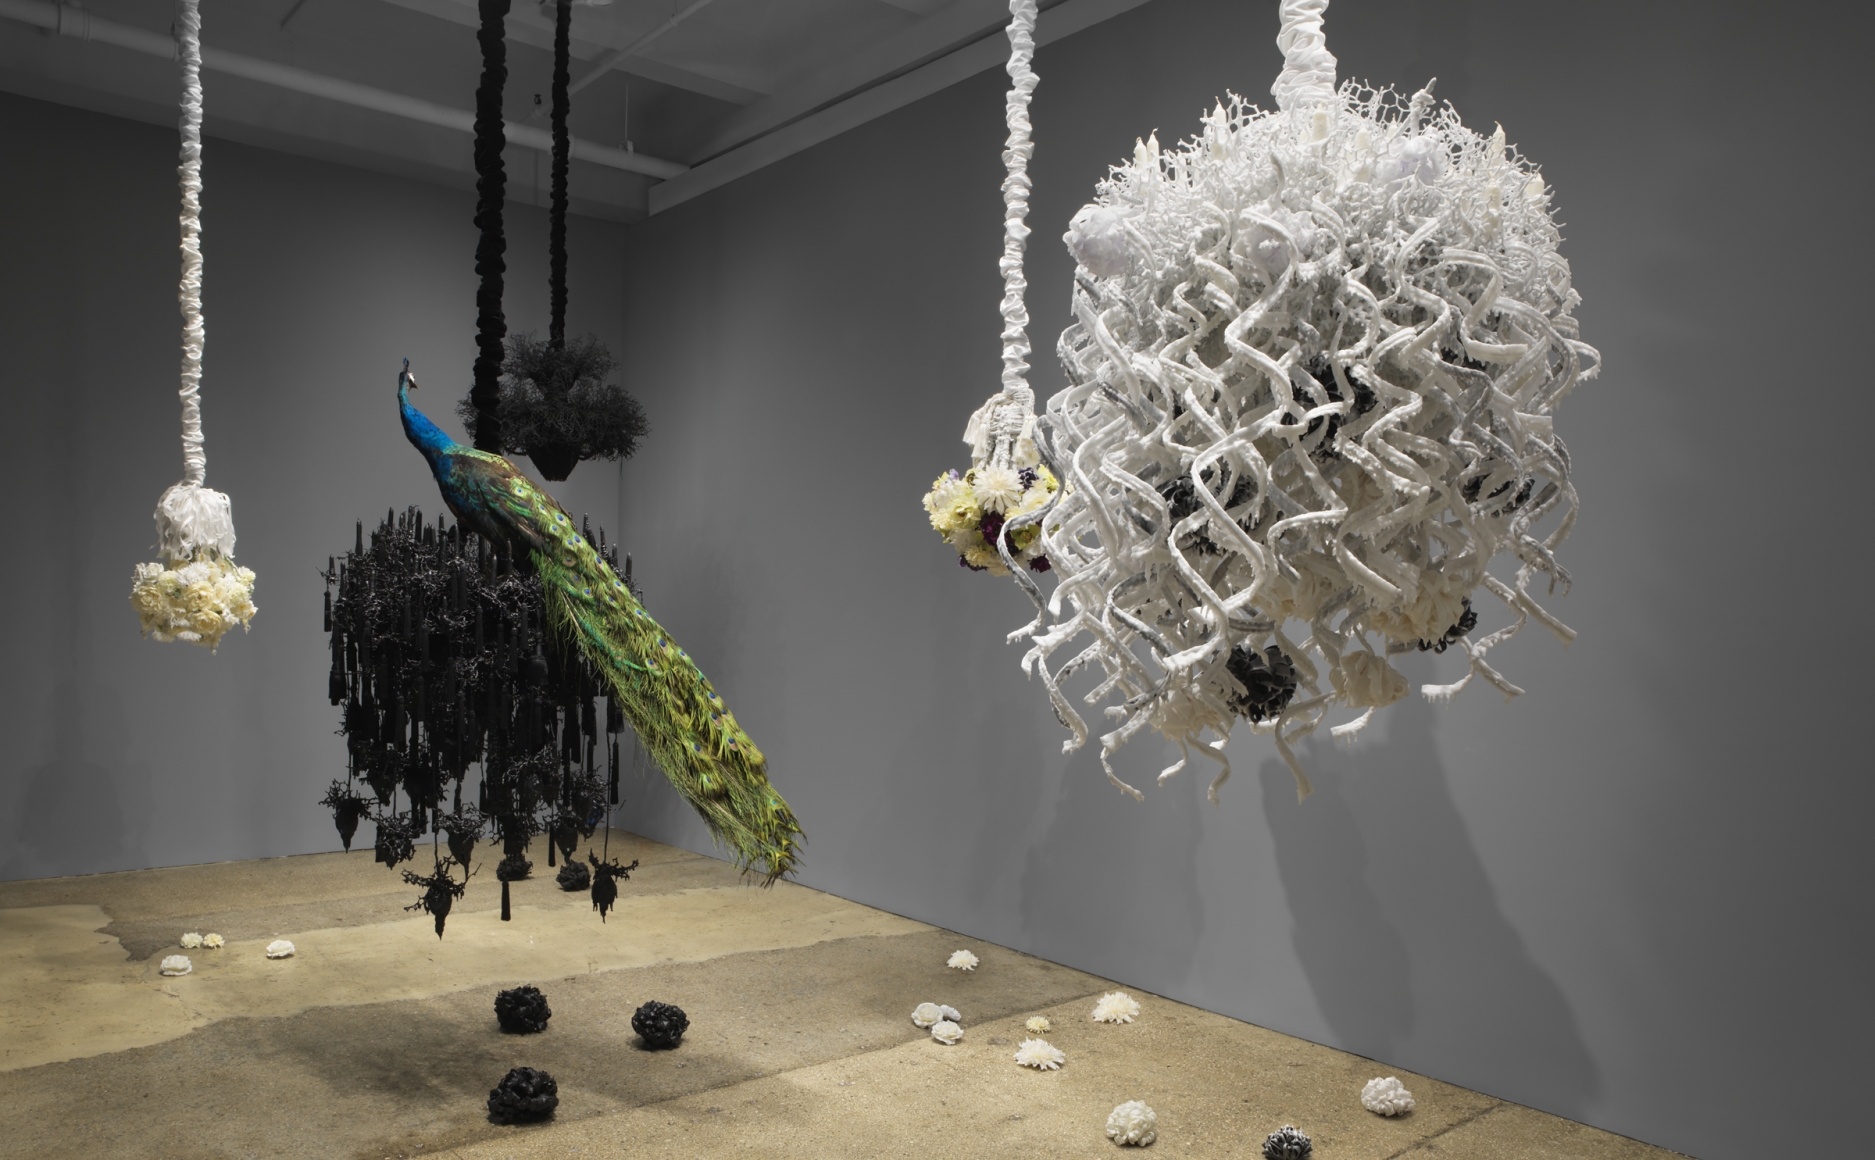 Petah Coyne Untitled #1410 (Mishima’s Spring Snow), 2015-16 Specially-formulated wax, pigment, ribbons, candles, chicken-wire fencing, wire, cable, cable nuts, thimbles, glue, steel, quick-link shackles, jaw-to-jaw swivel, silk Duchesse satin, 3/8″ Grade 30 proof coil chain, Velcro, thread, paper towels, plastic 66.5 x 46.5 x 46.5 inches (168.91 x 118.11 x 118.11 cm)